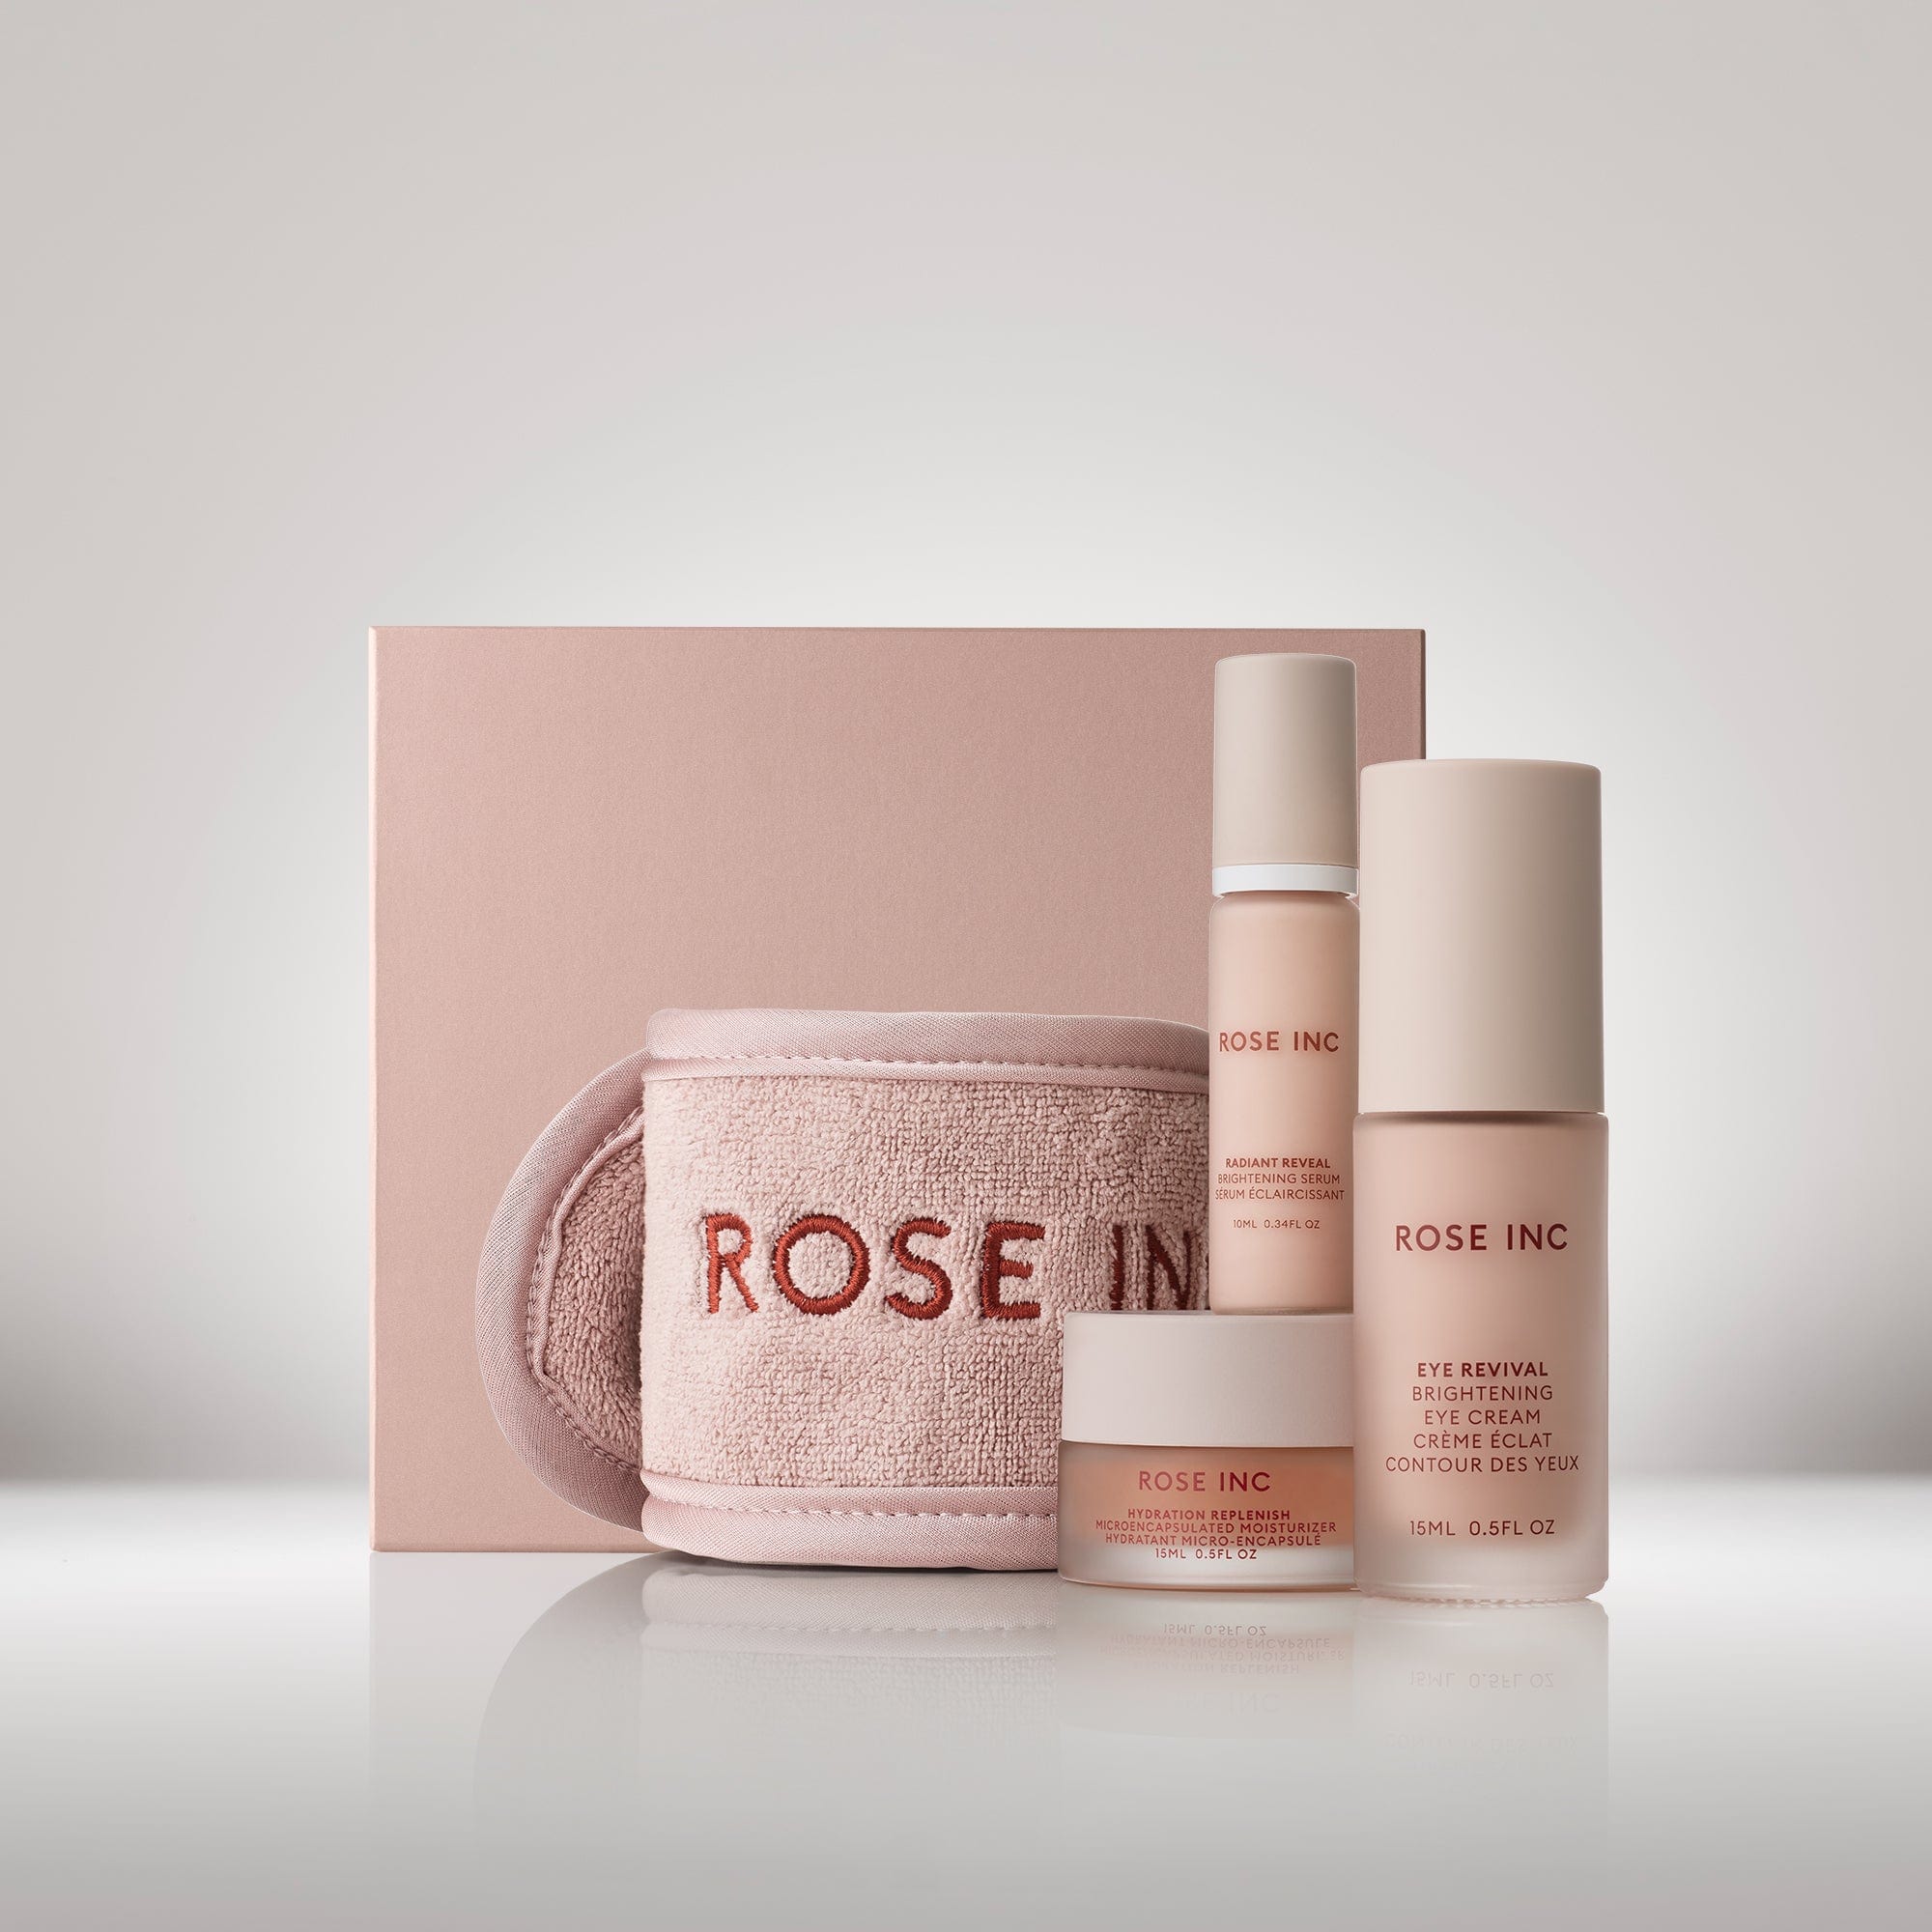 Image of the Brightening Essentials Set which includes the Eye Revival Brightening Eye Cream, Travel Size Radiant Reveal Brightening Serum, Travel Size Hydration Replenish Moisturizer and Rose Inc. Spa Headband.